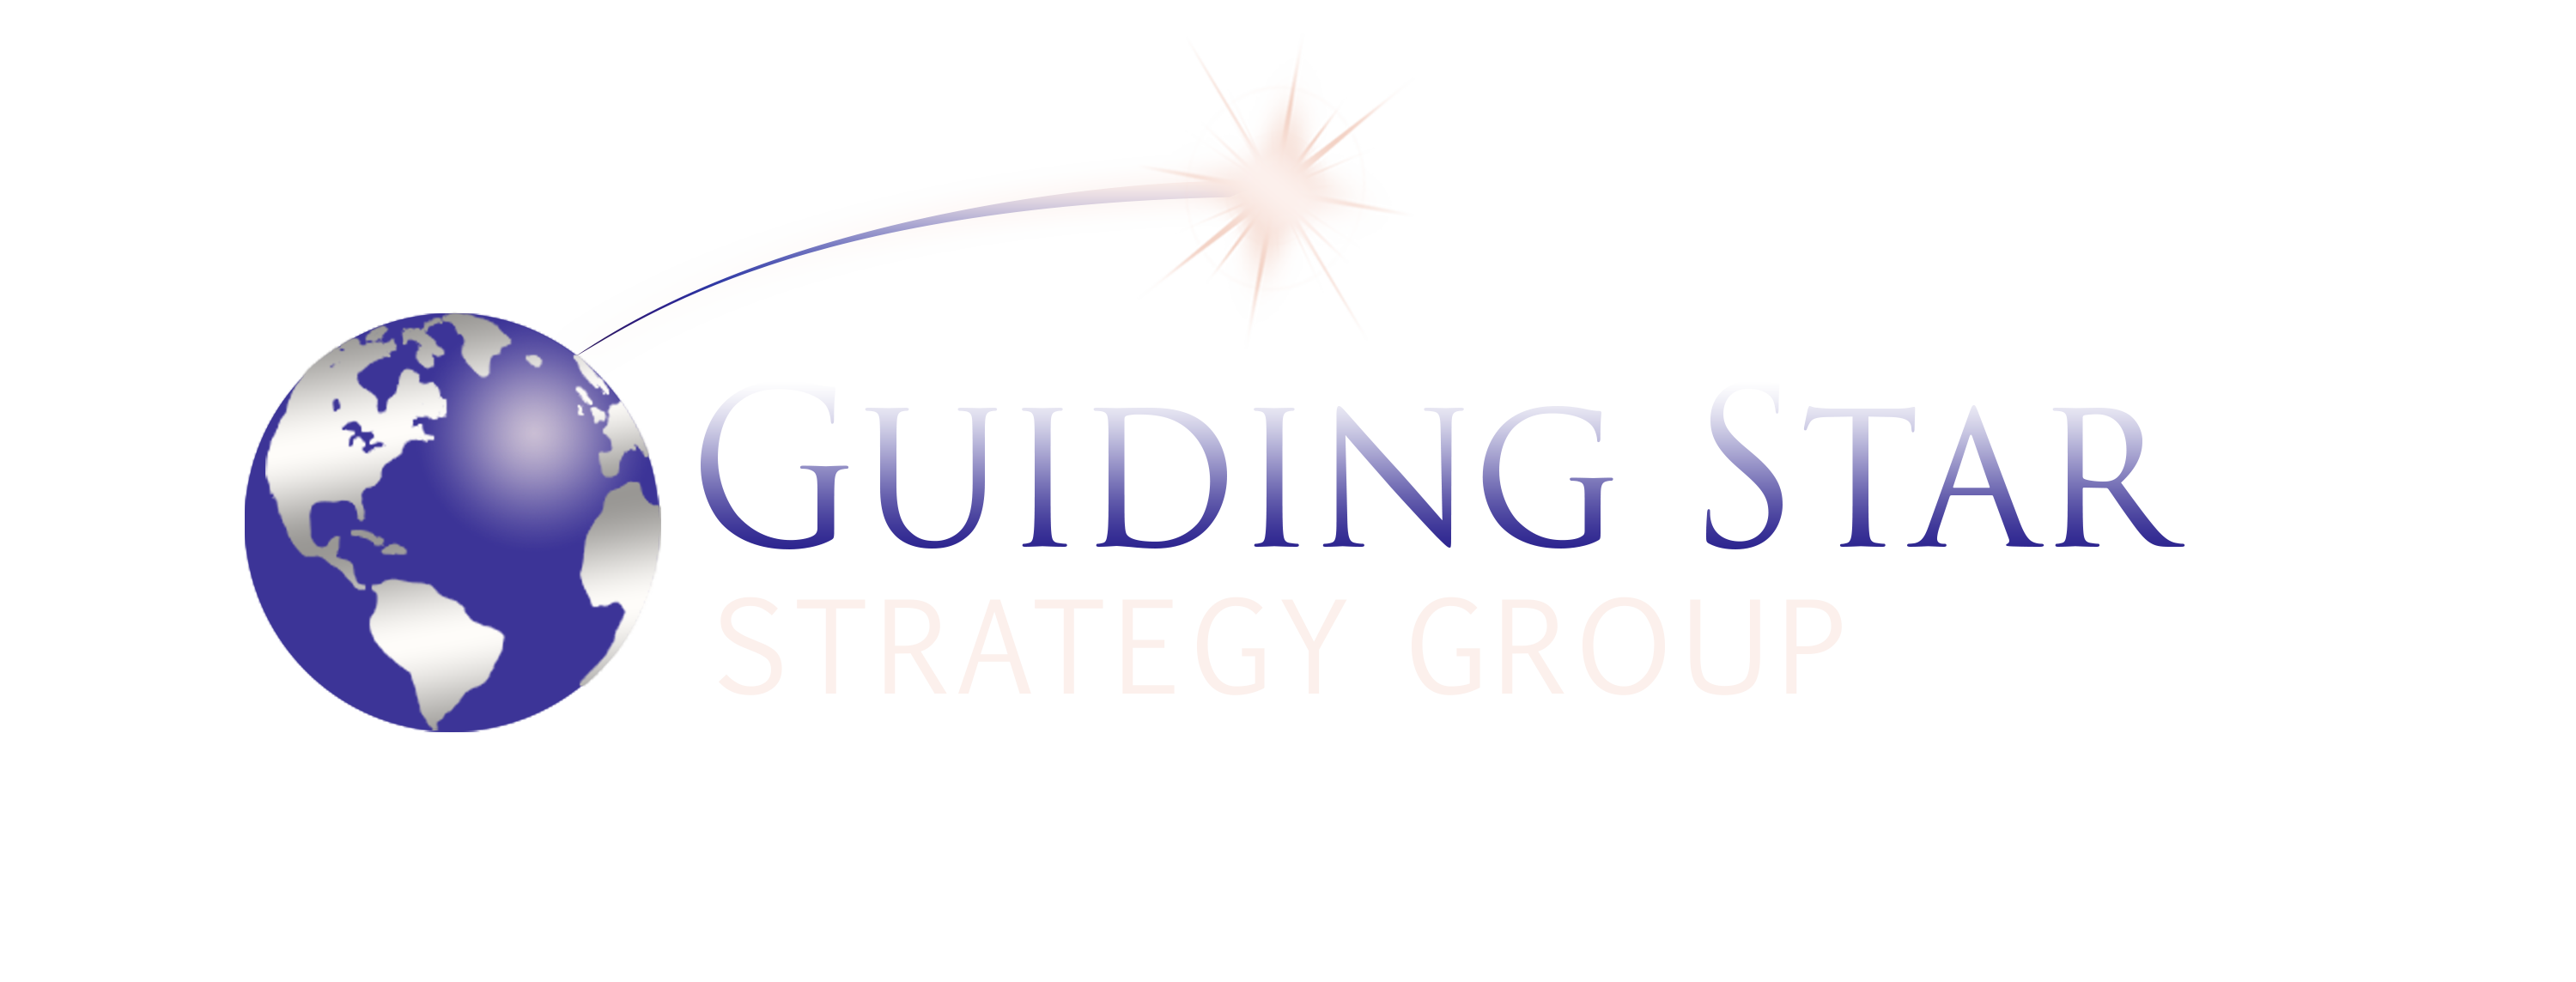 Guiding Star Strategy Group